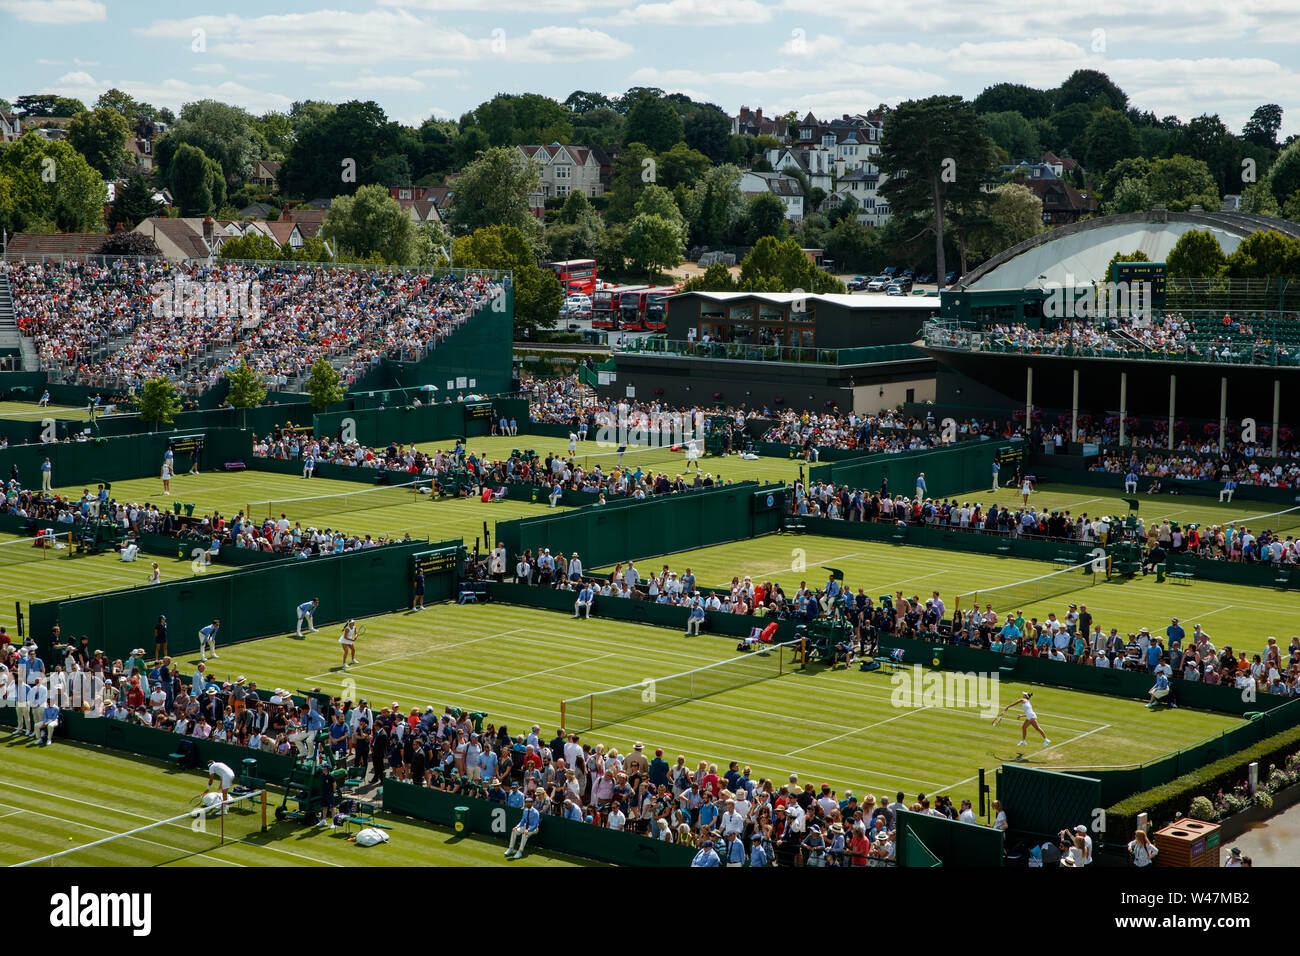 General View at The Wimbledon Championships 2019. Held at The All England Lawn Tennis Club, Wimbledon. Stock Photo